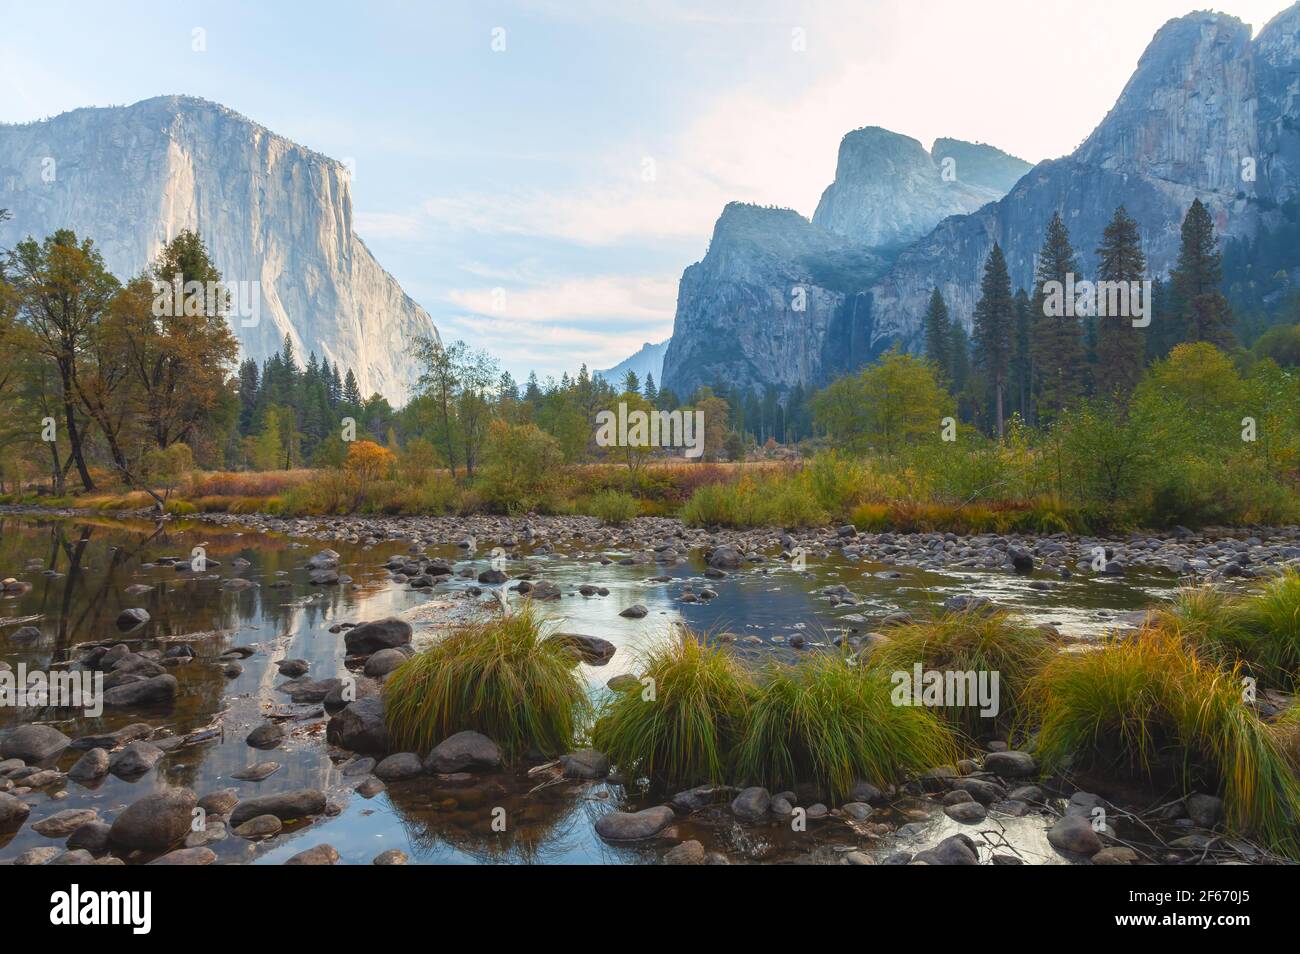 Iconic view of Yosemite Valley by the Merced River in late autumn, Yosemite National Park, California, USA, at sunrise. Stock Photo